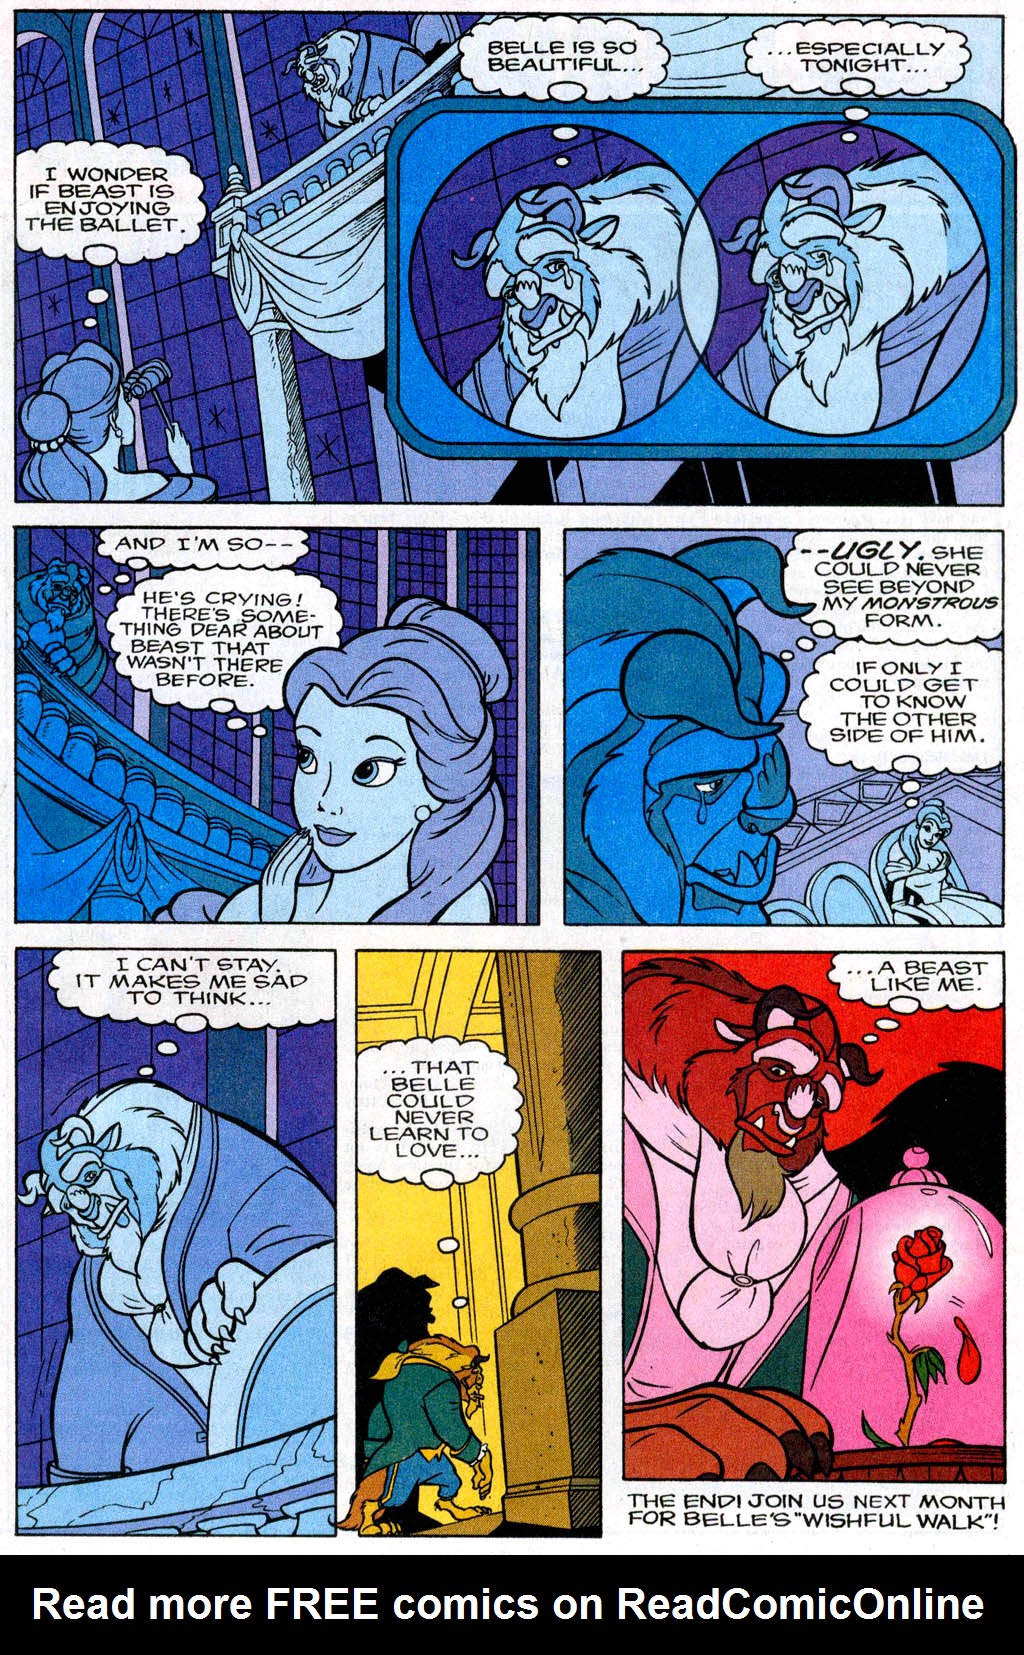 Read online Disney's Beauty and the Beast comic -  Issue #2 - 22